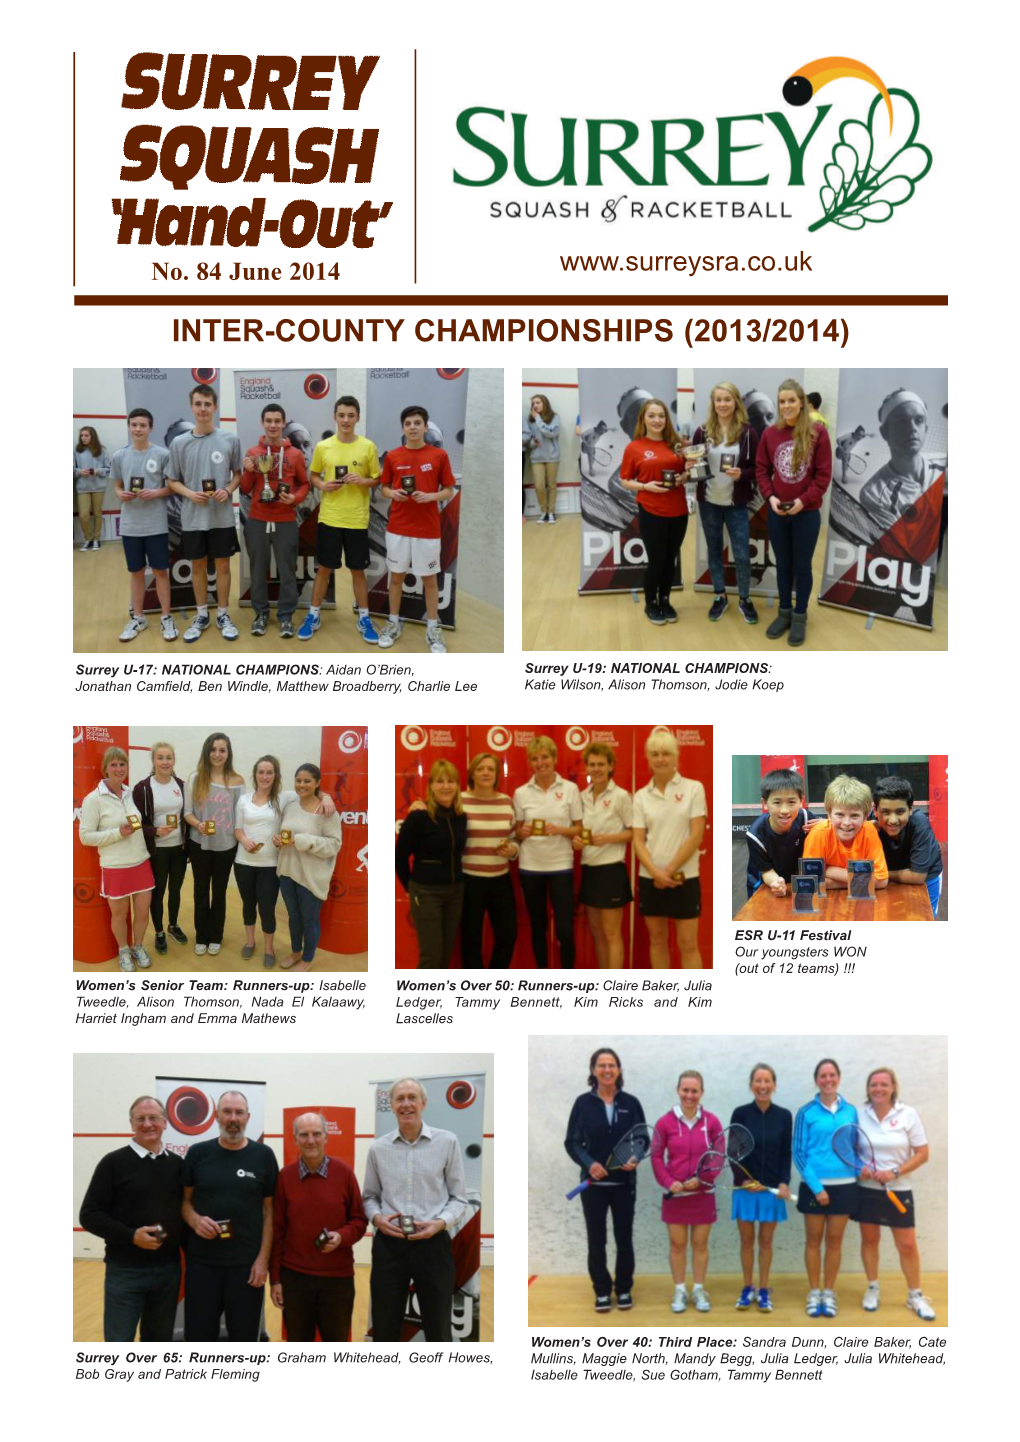 Inter-County Championships (2013/2014)